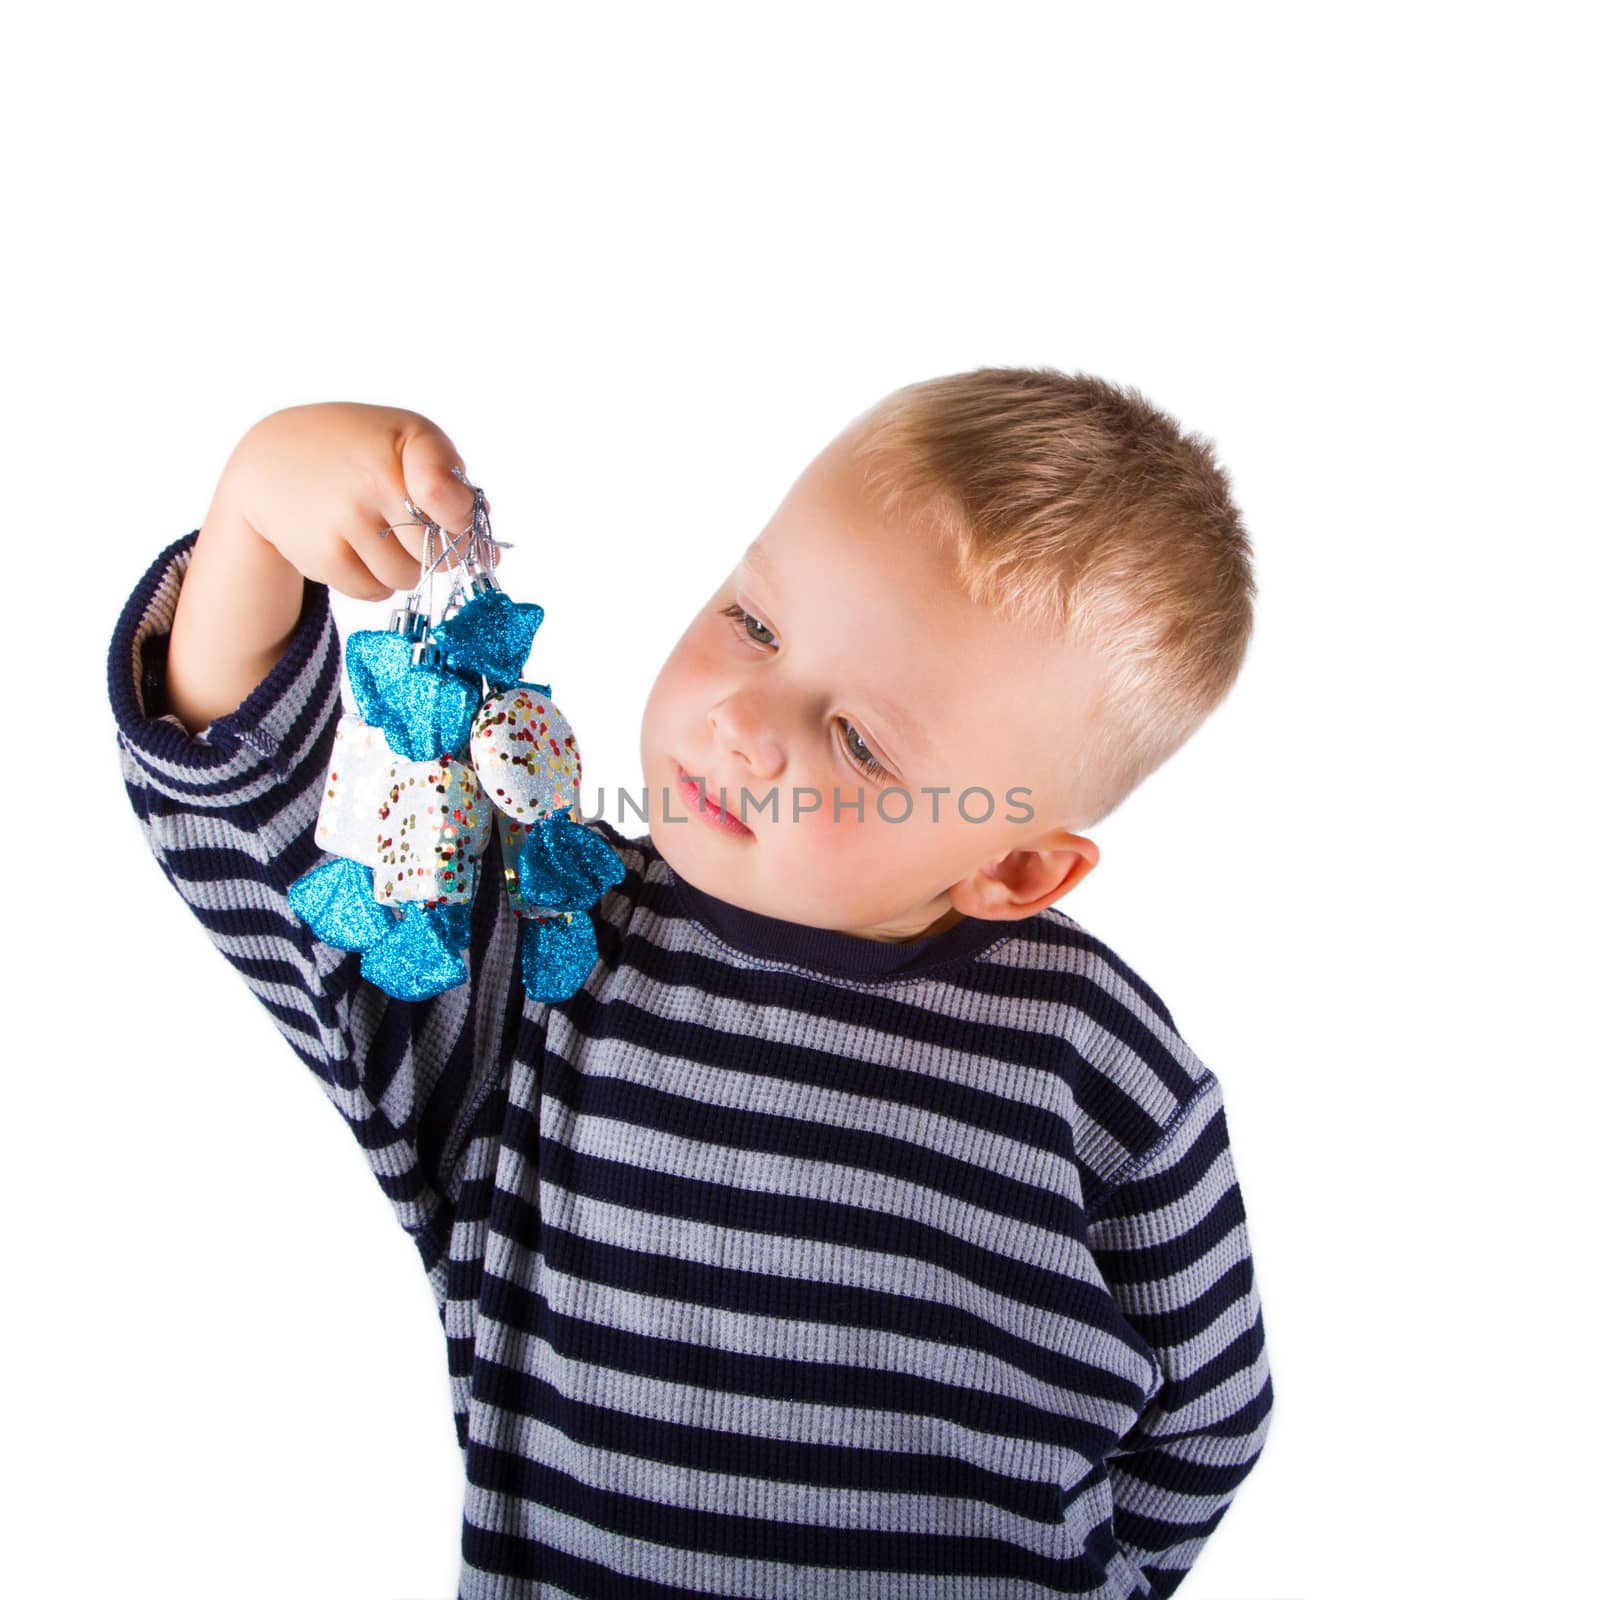 Smiling child with christmas decorations in hand. Isolated on white background